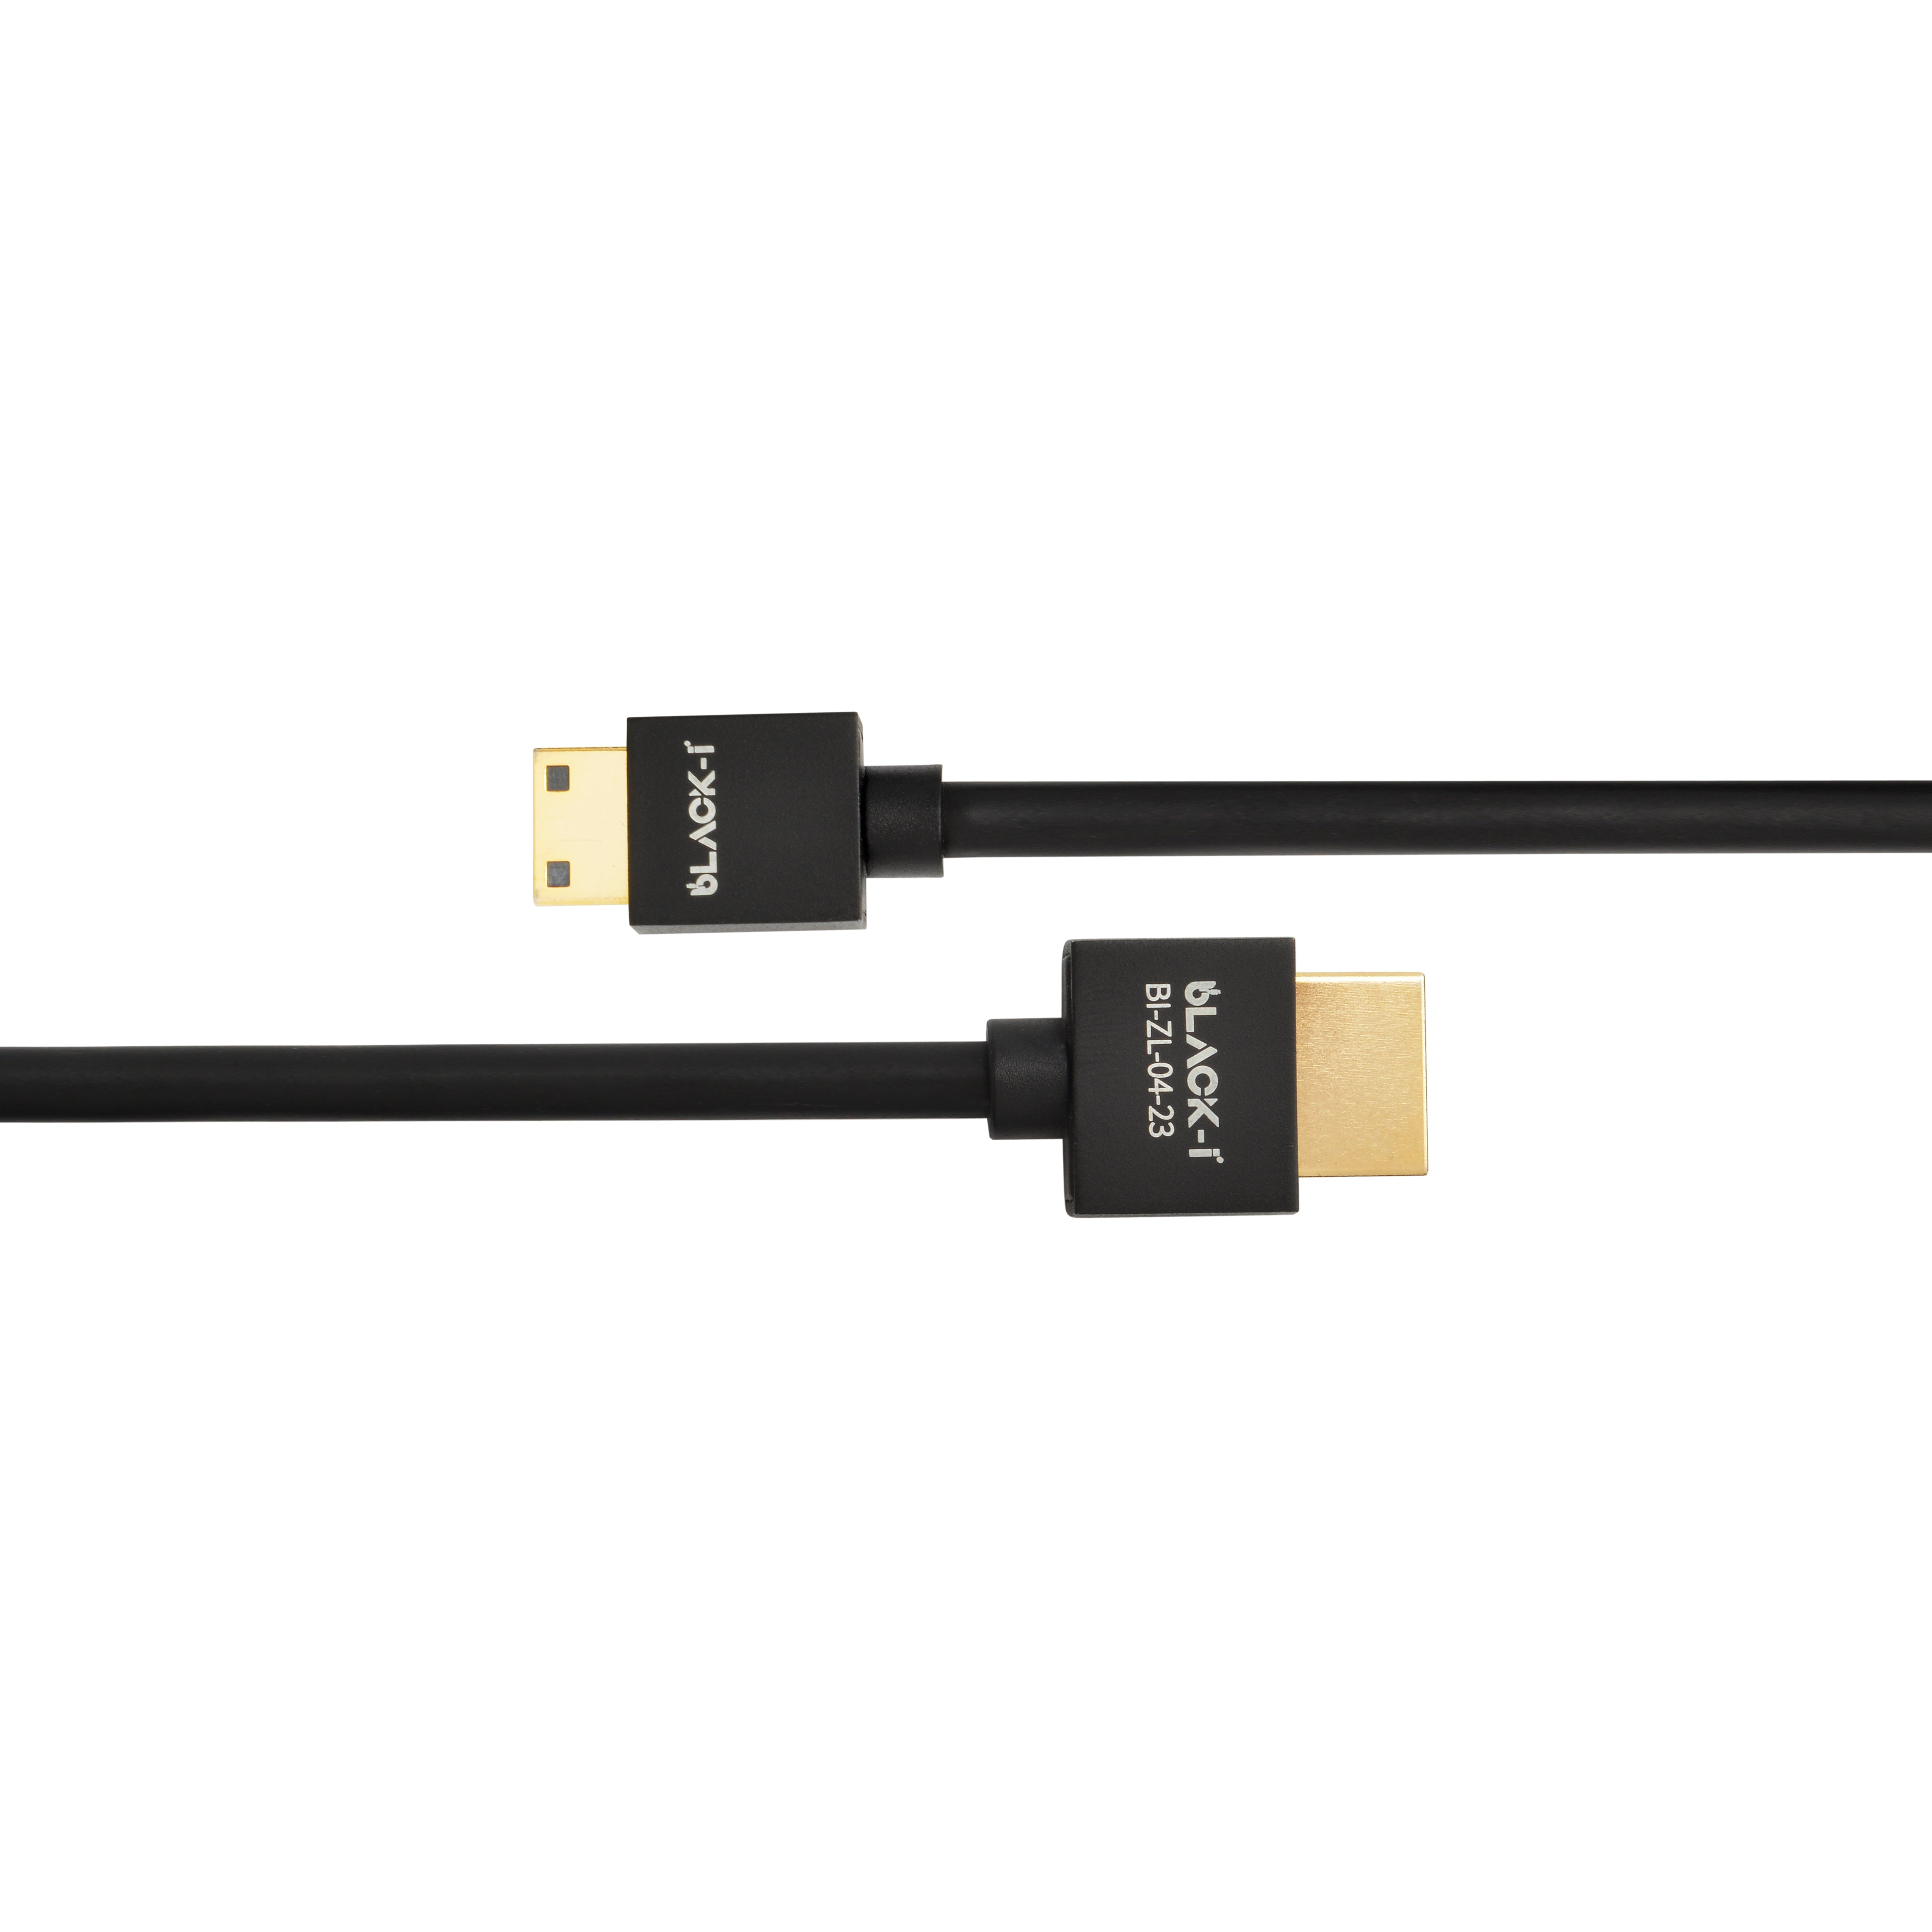 Black-i Mini HDMI to HDMI Cable - 4K@60Hz, 2 Meter Length – Crisp Visuals in a Compact Form for Superior Connectivity